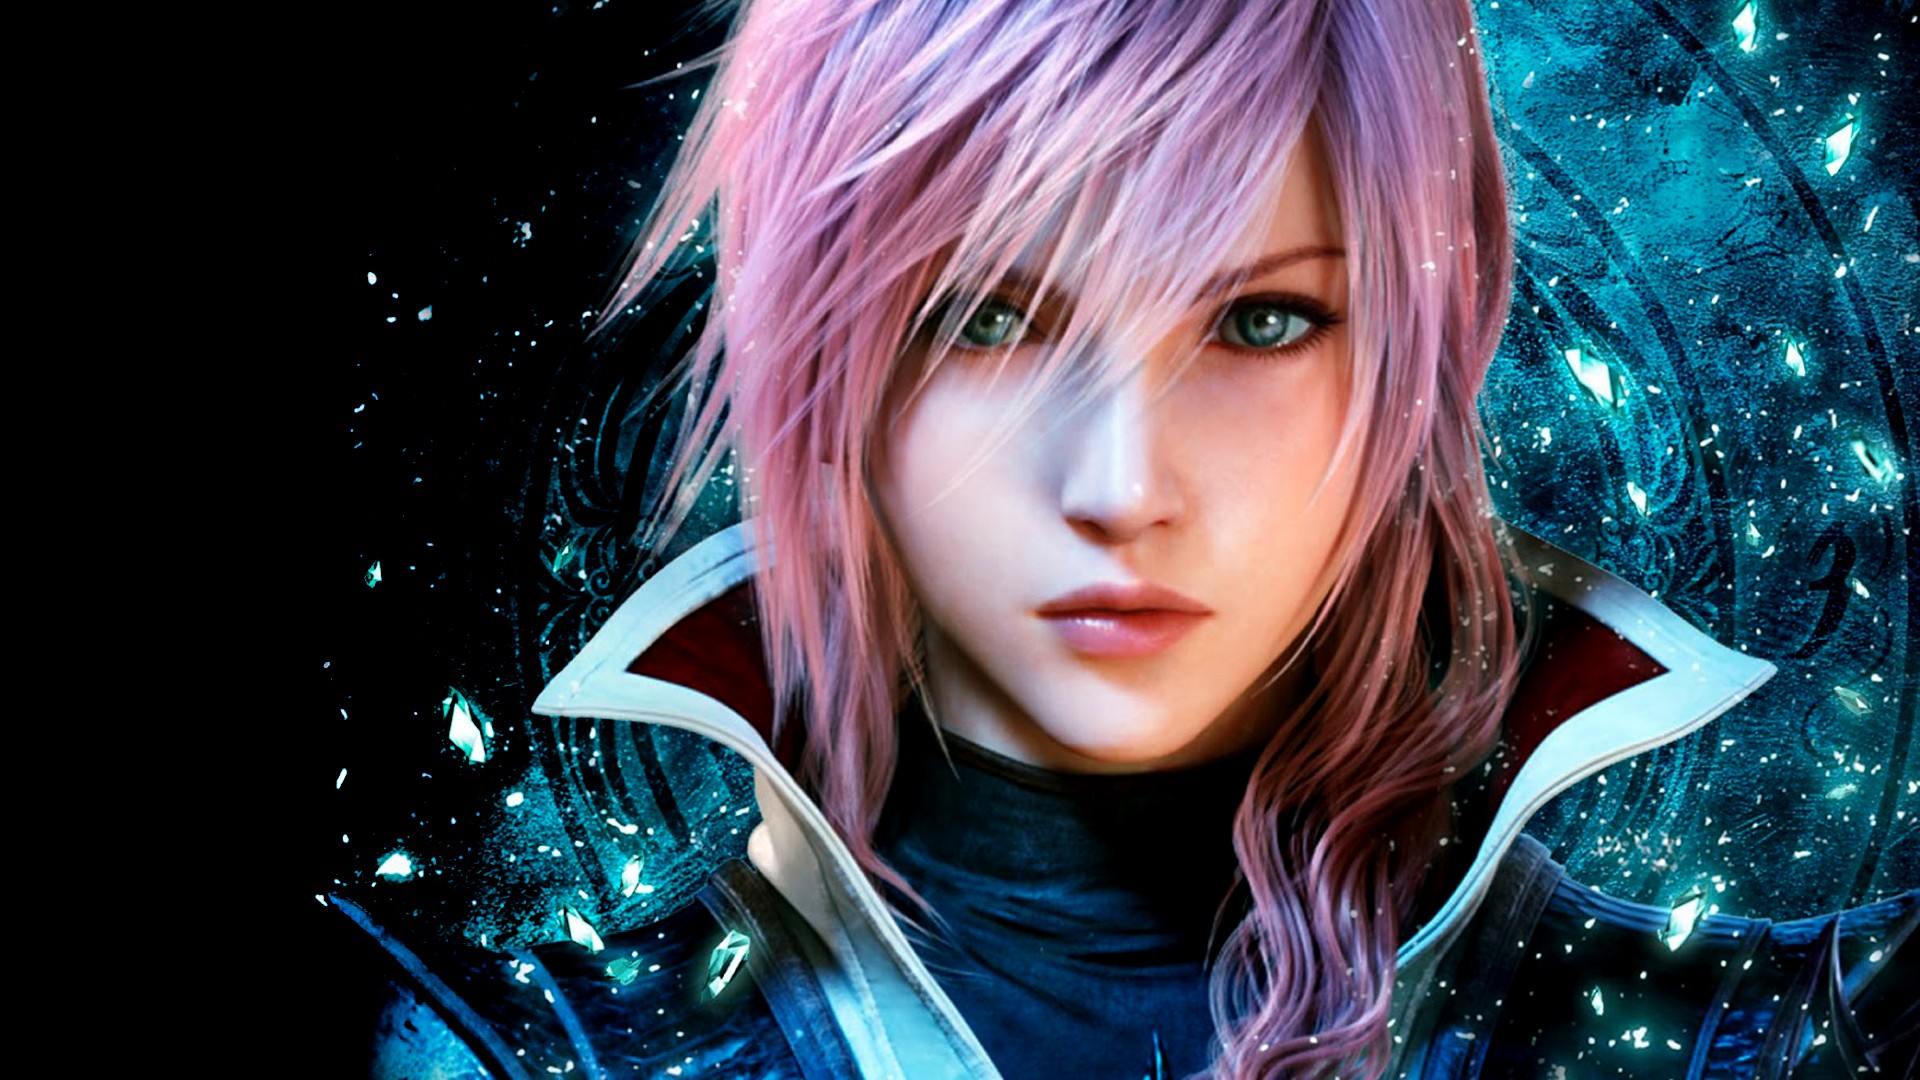 Lightning Returns: Final Fantasy XIII Backgrounds, Compatible - PC, Mobile, Gadgets| 1920x1080 px